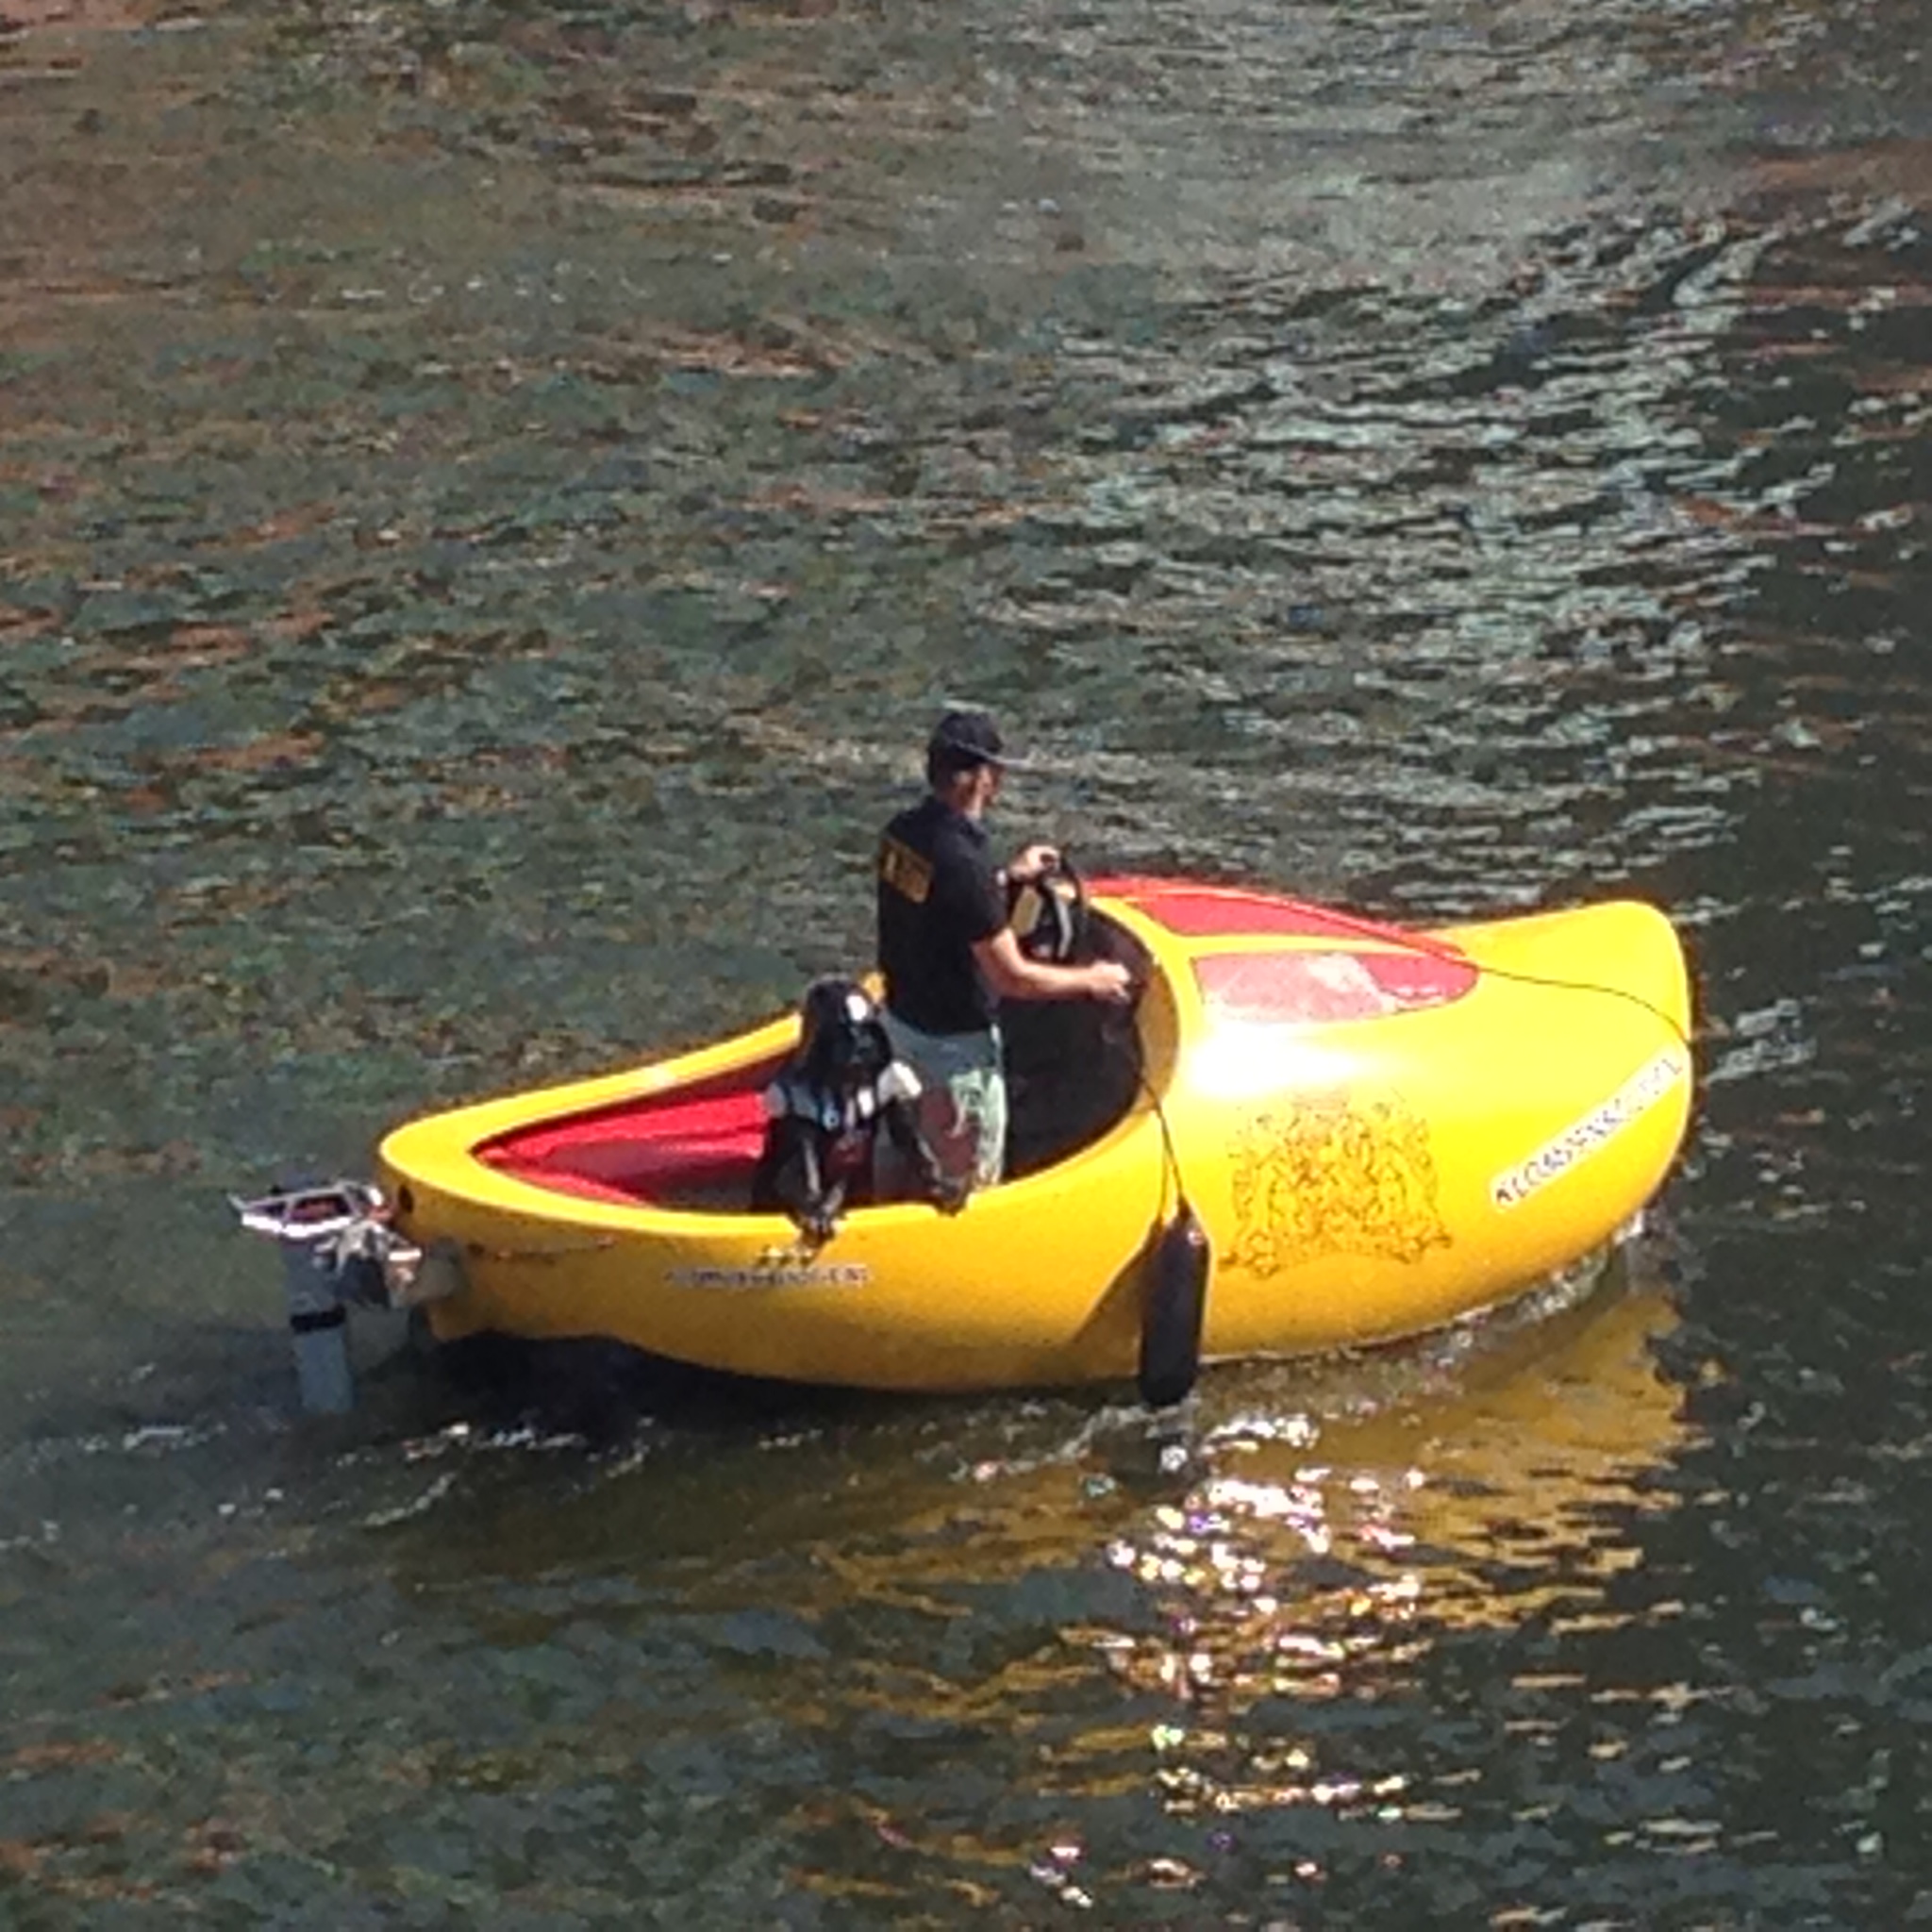 Wooden shoe boat on the river transporting Darth Vader